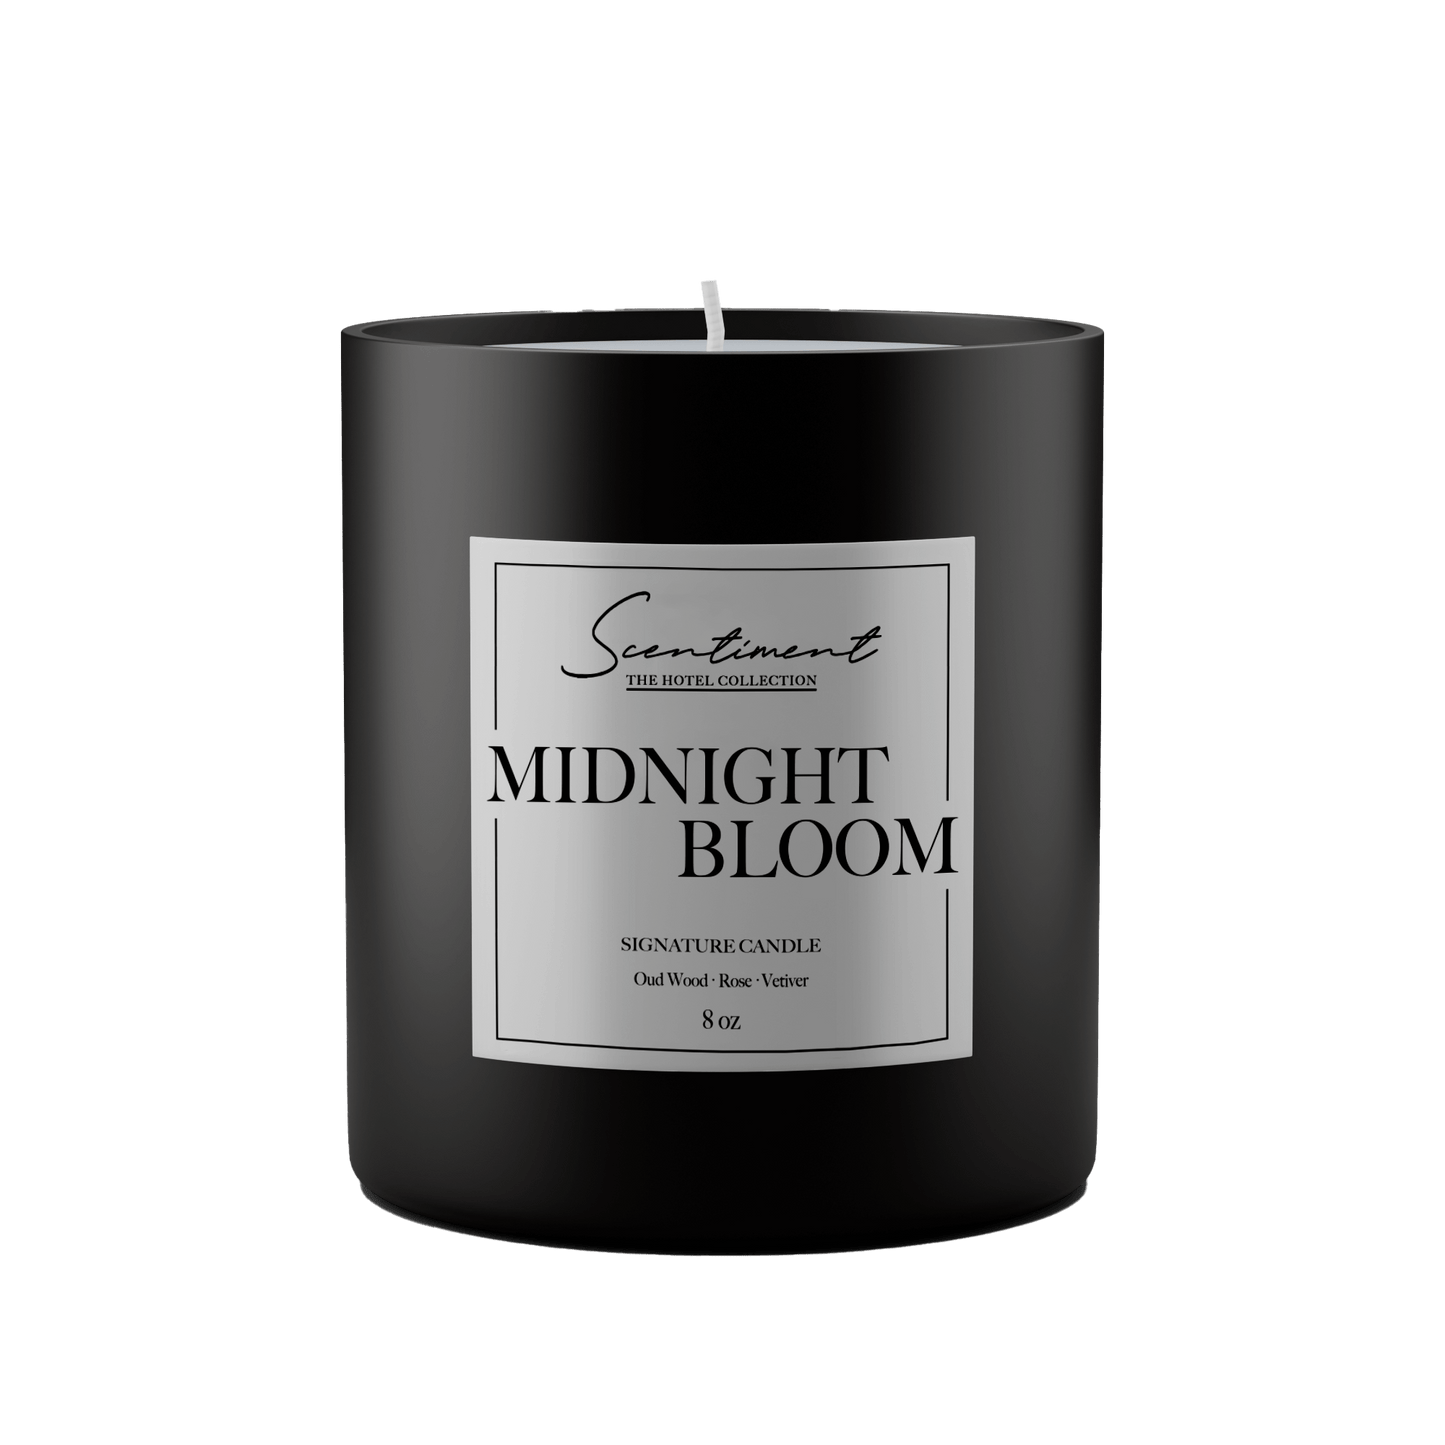 Inspired by Fairmont Hotels & Resorts®, Midnight Bloom